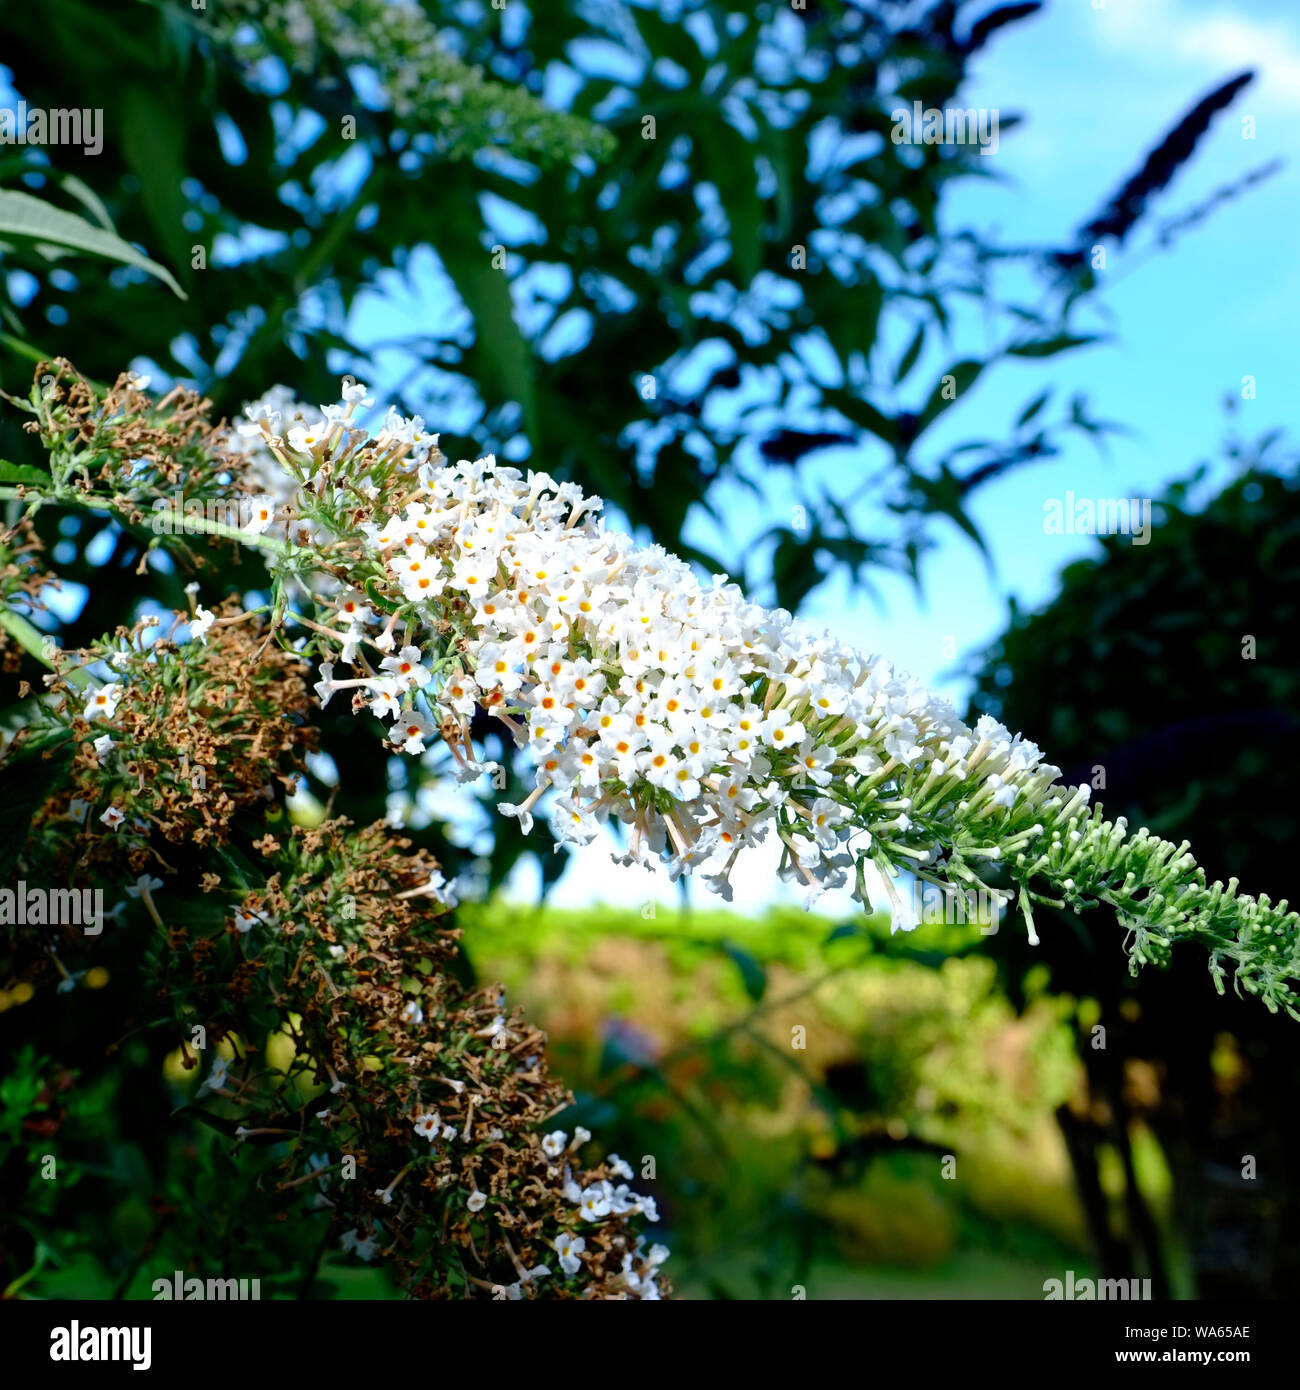 Buddleja Davidii or White Profusion flowers in bloom in an English cottage garden Stock Photo